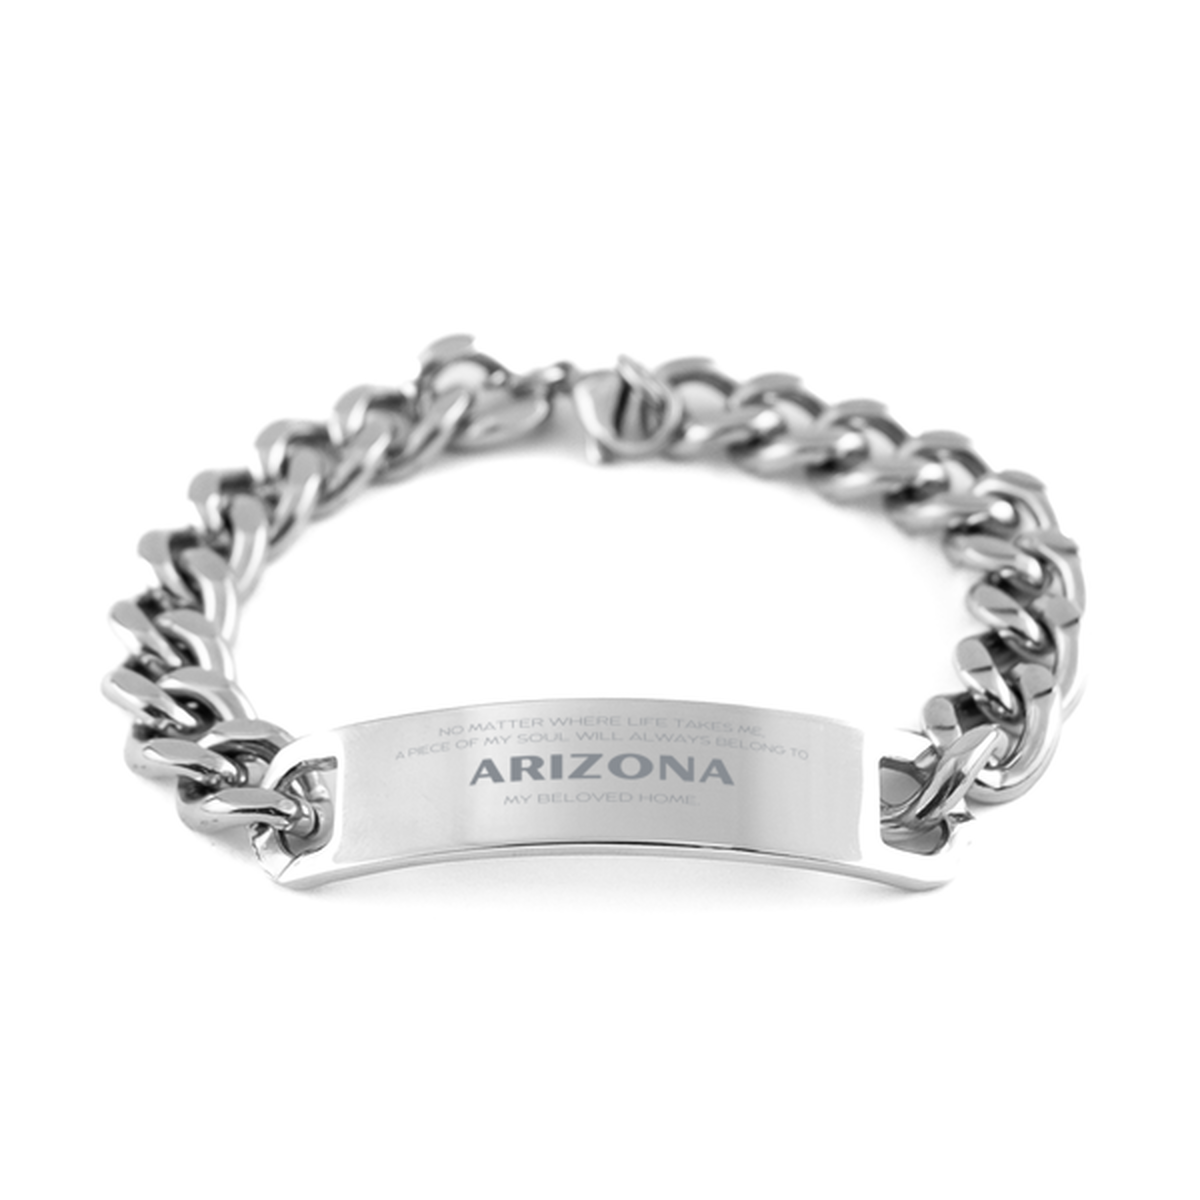 Love Arizona State Gifts, My soul will always belong to Arizona, Proud Cuban Chain Stainless Steel Bracelet, Birthday Unique Gifts For Arizona Men, Women, Friends